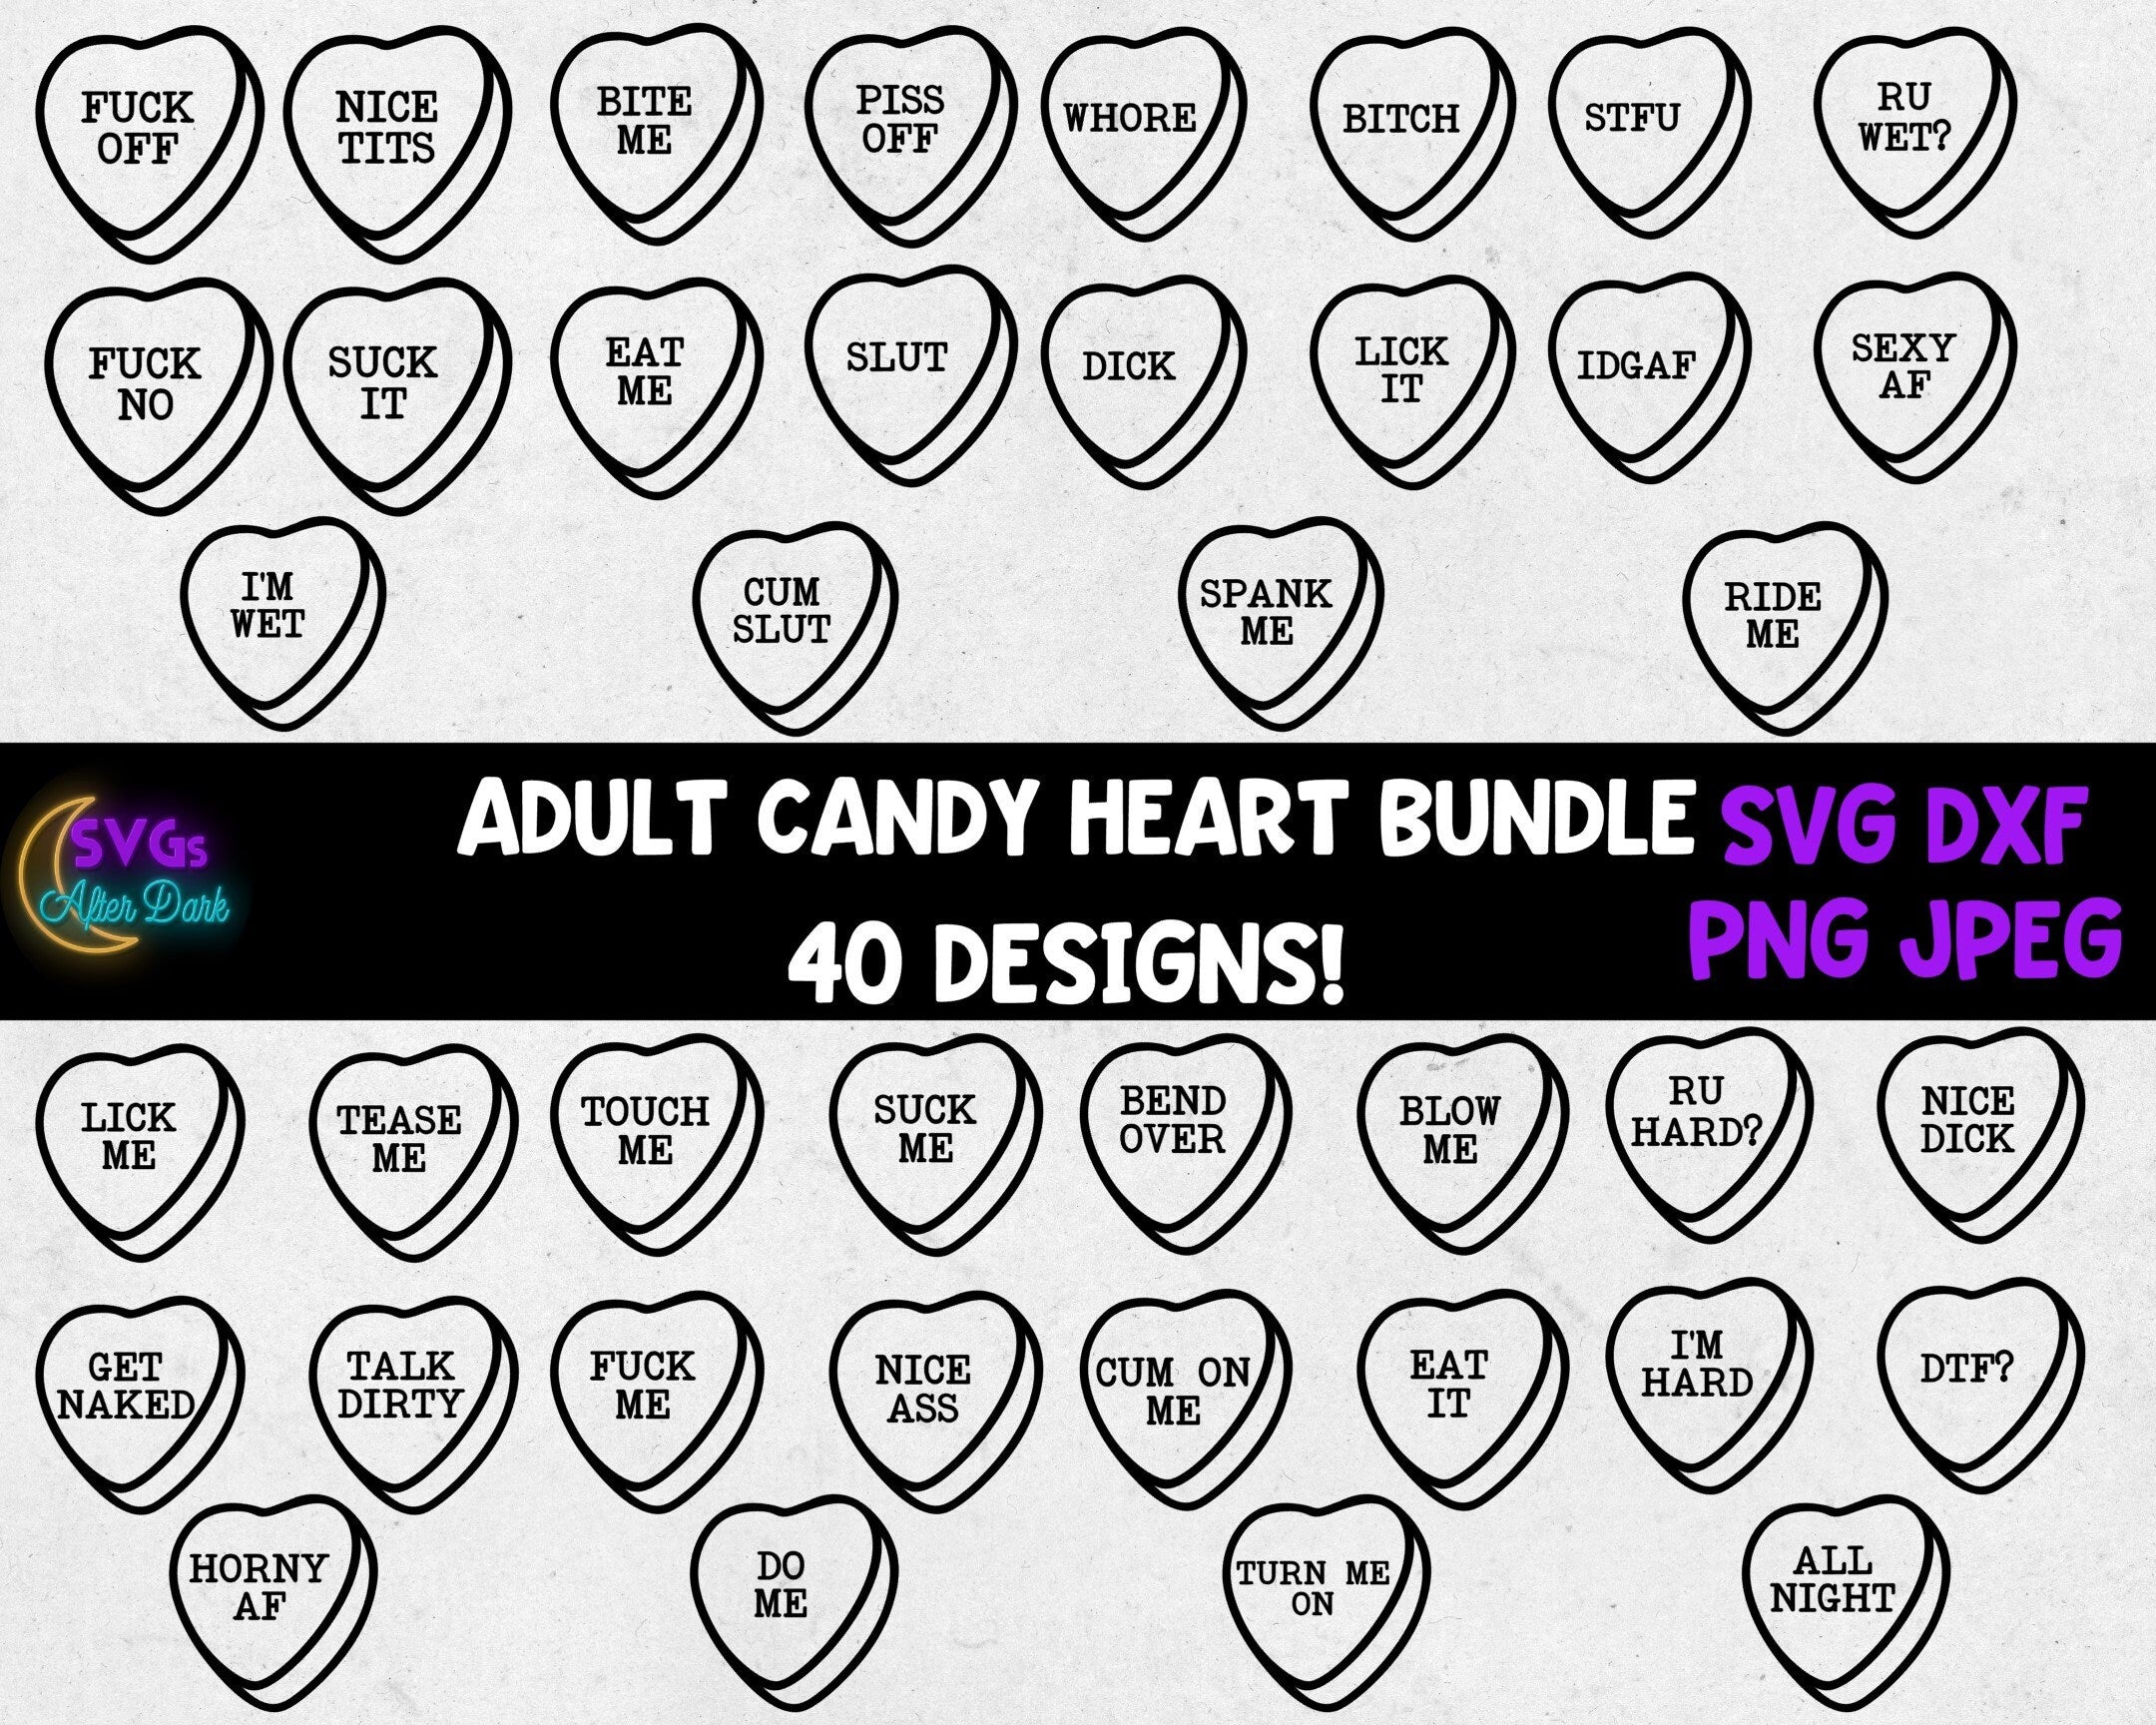 NSFW SVG - Adult Candy Hearts SVG - Adult Conversation Hearts Svg - Dirty Valentine's Day Svg